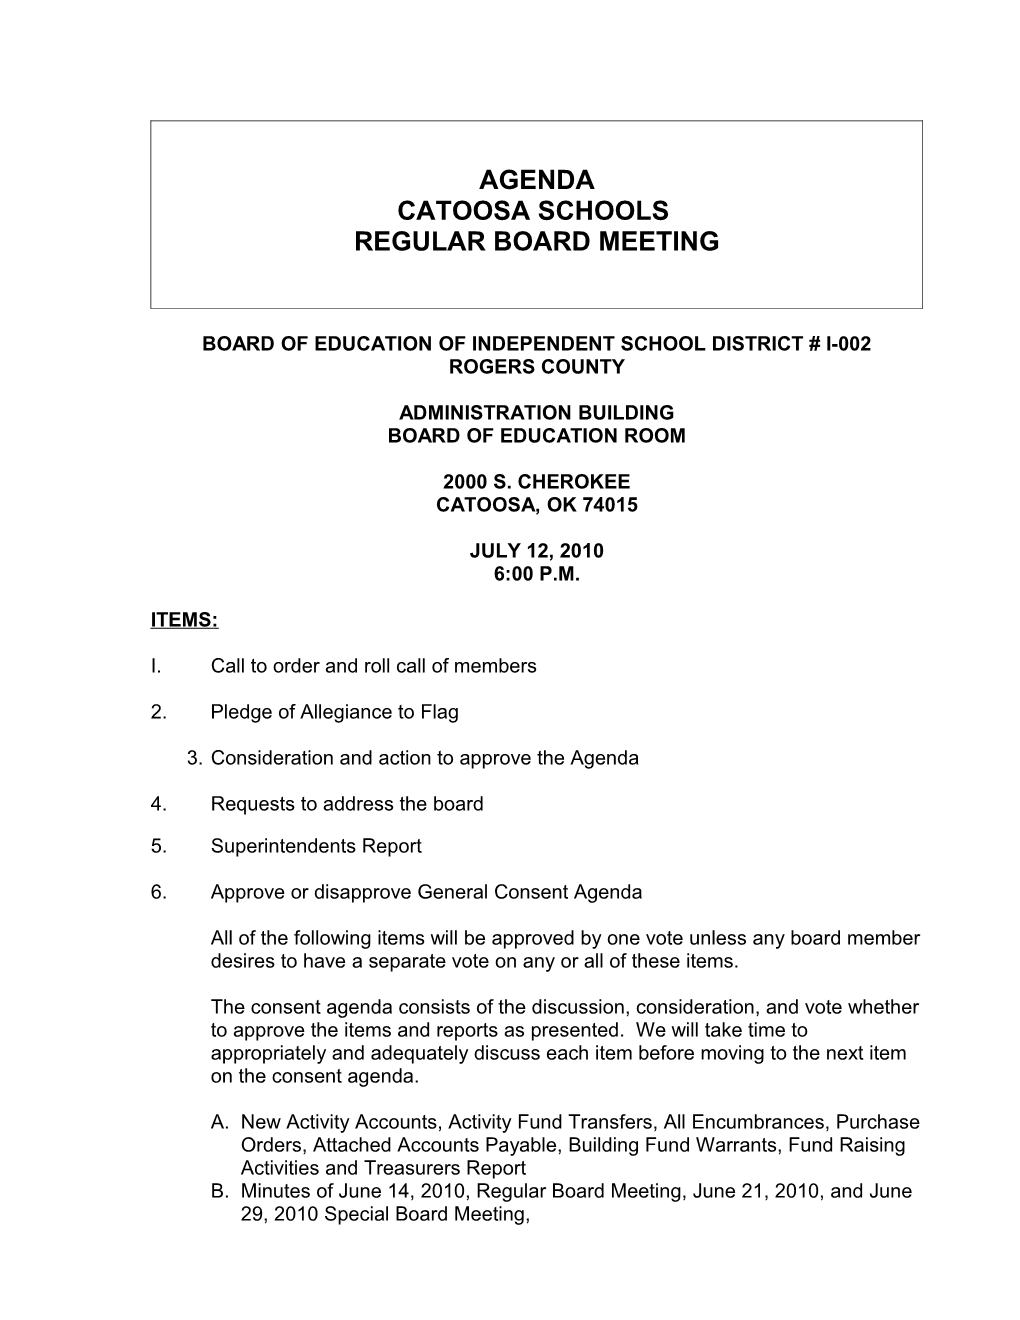 Board of Education of Independent School District # I-002 s1